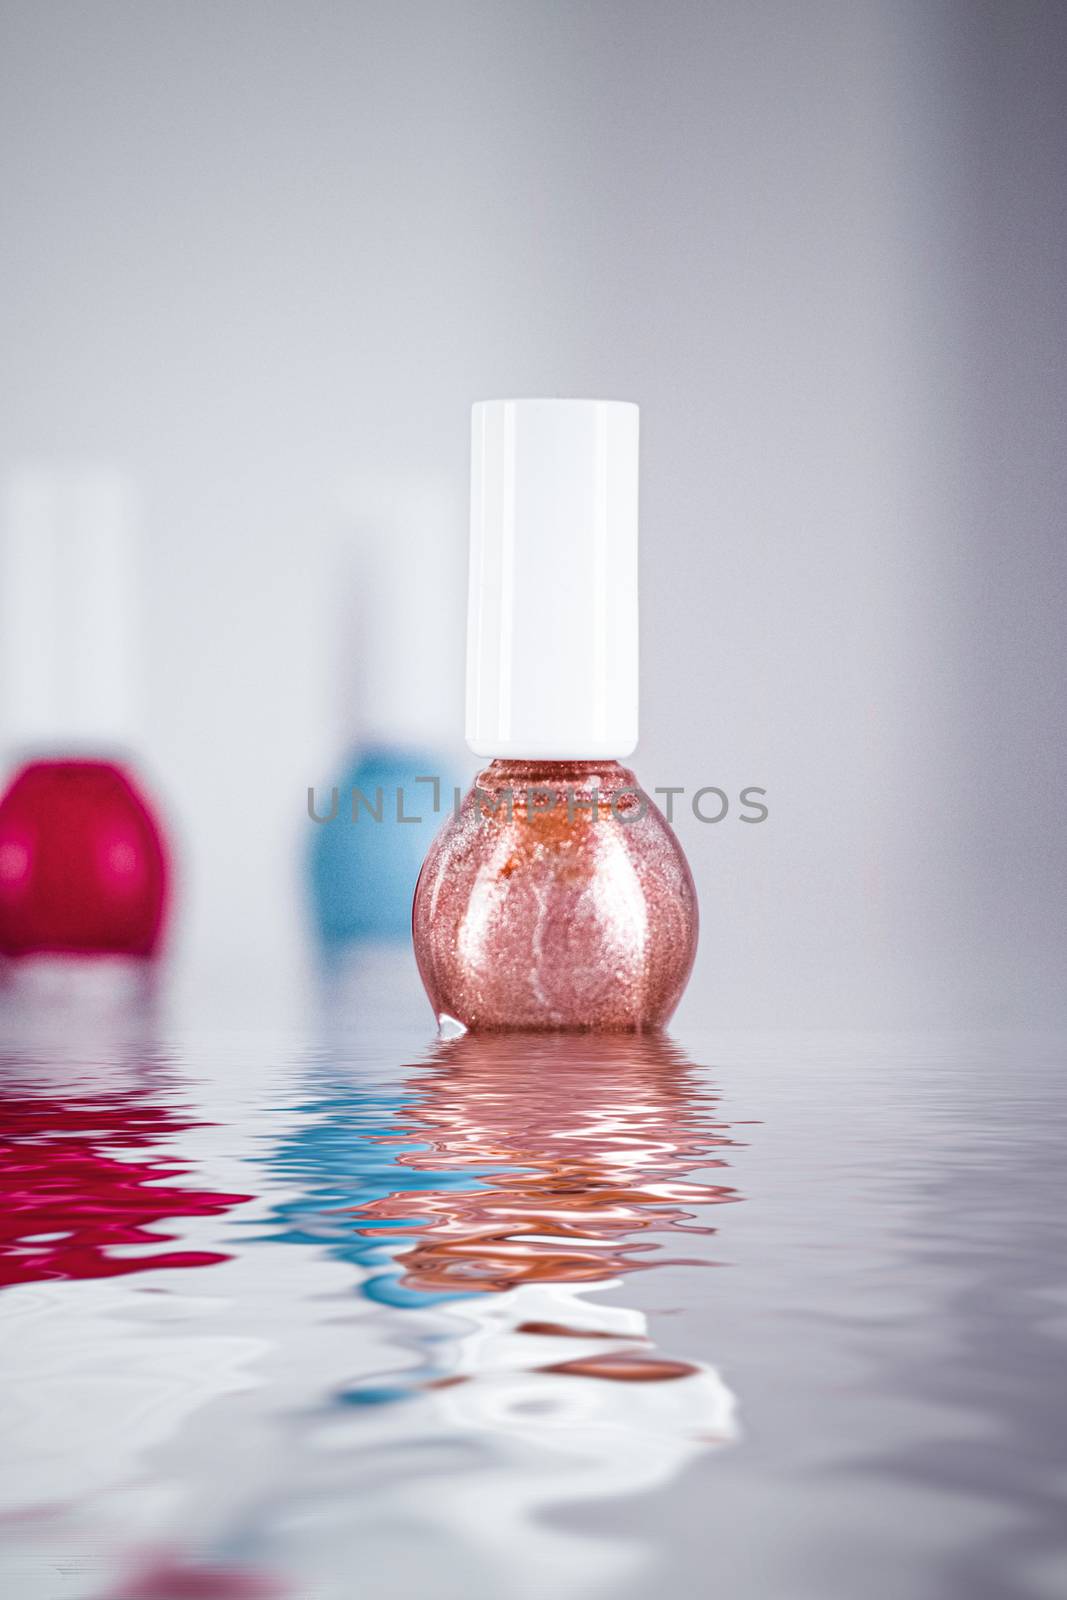 Nail polish bottles for manicure and pedicure, beauty and cosmetic products